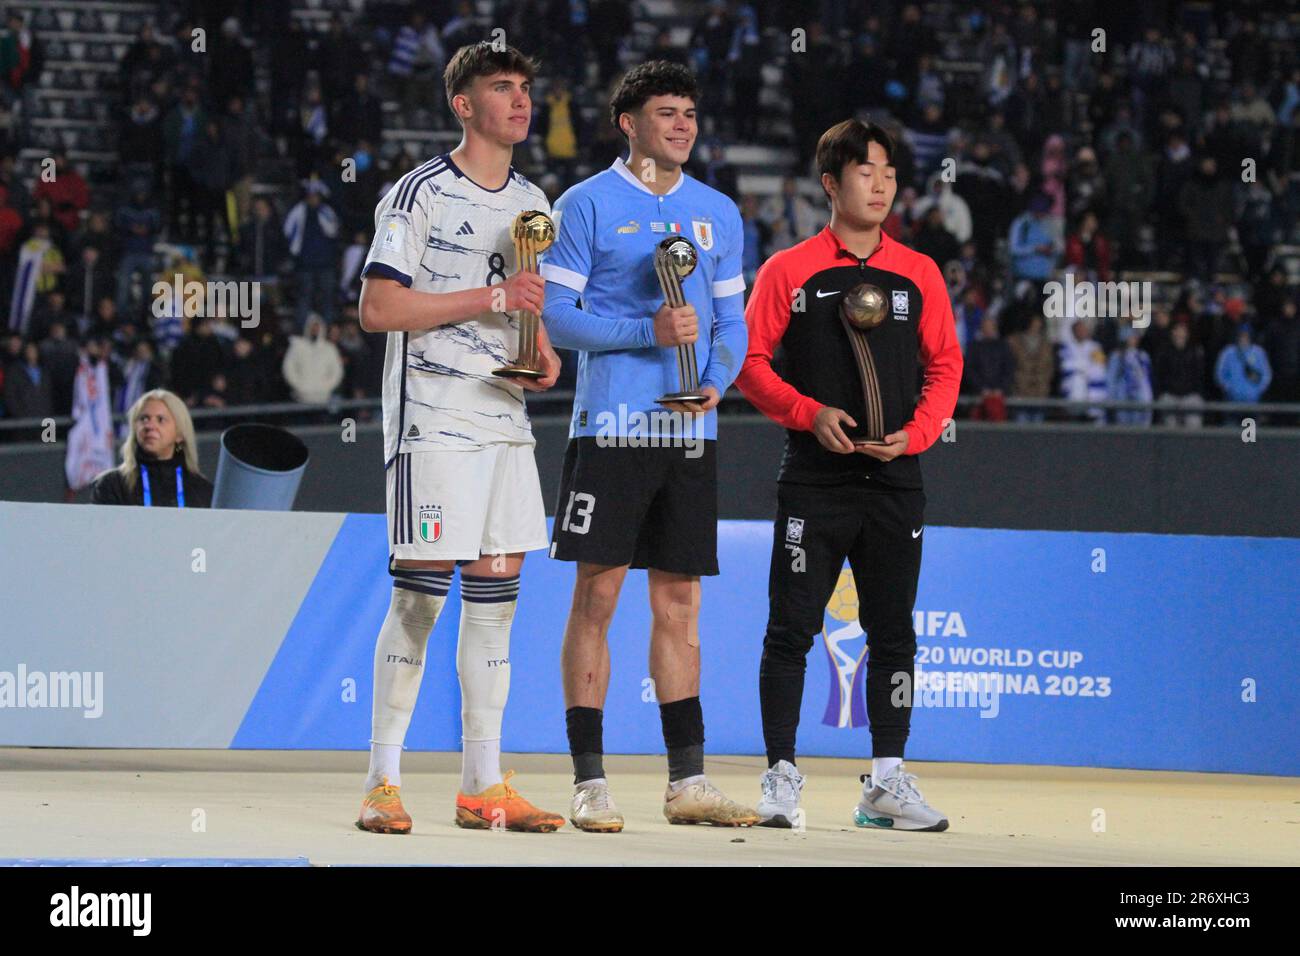 La Plata, Argentina. 11th June, 2023. Estadio Ciudad de La Plata Cesare Casadei from Italy, Alan Matturro from Uruguay and Seung-Won Lee from South Korea, pose for the photo with the Golden, Silver and Bronze Balls, respectively after the match between Uruguay and Italy, for the Final of the FIFA SUB-20 World Cup Argentina 2023, at Estadio Ciudad de La Plata this Sunday 11. 30761 (Pool Pelaez Burga/SPP) Credit: SPP Sport Press Photo. /Alamy Live News Stock Photo